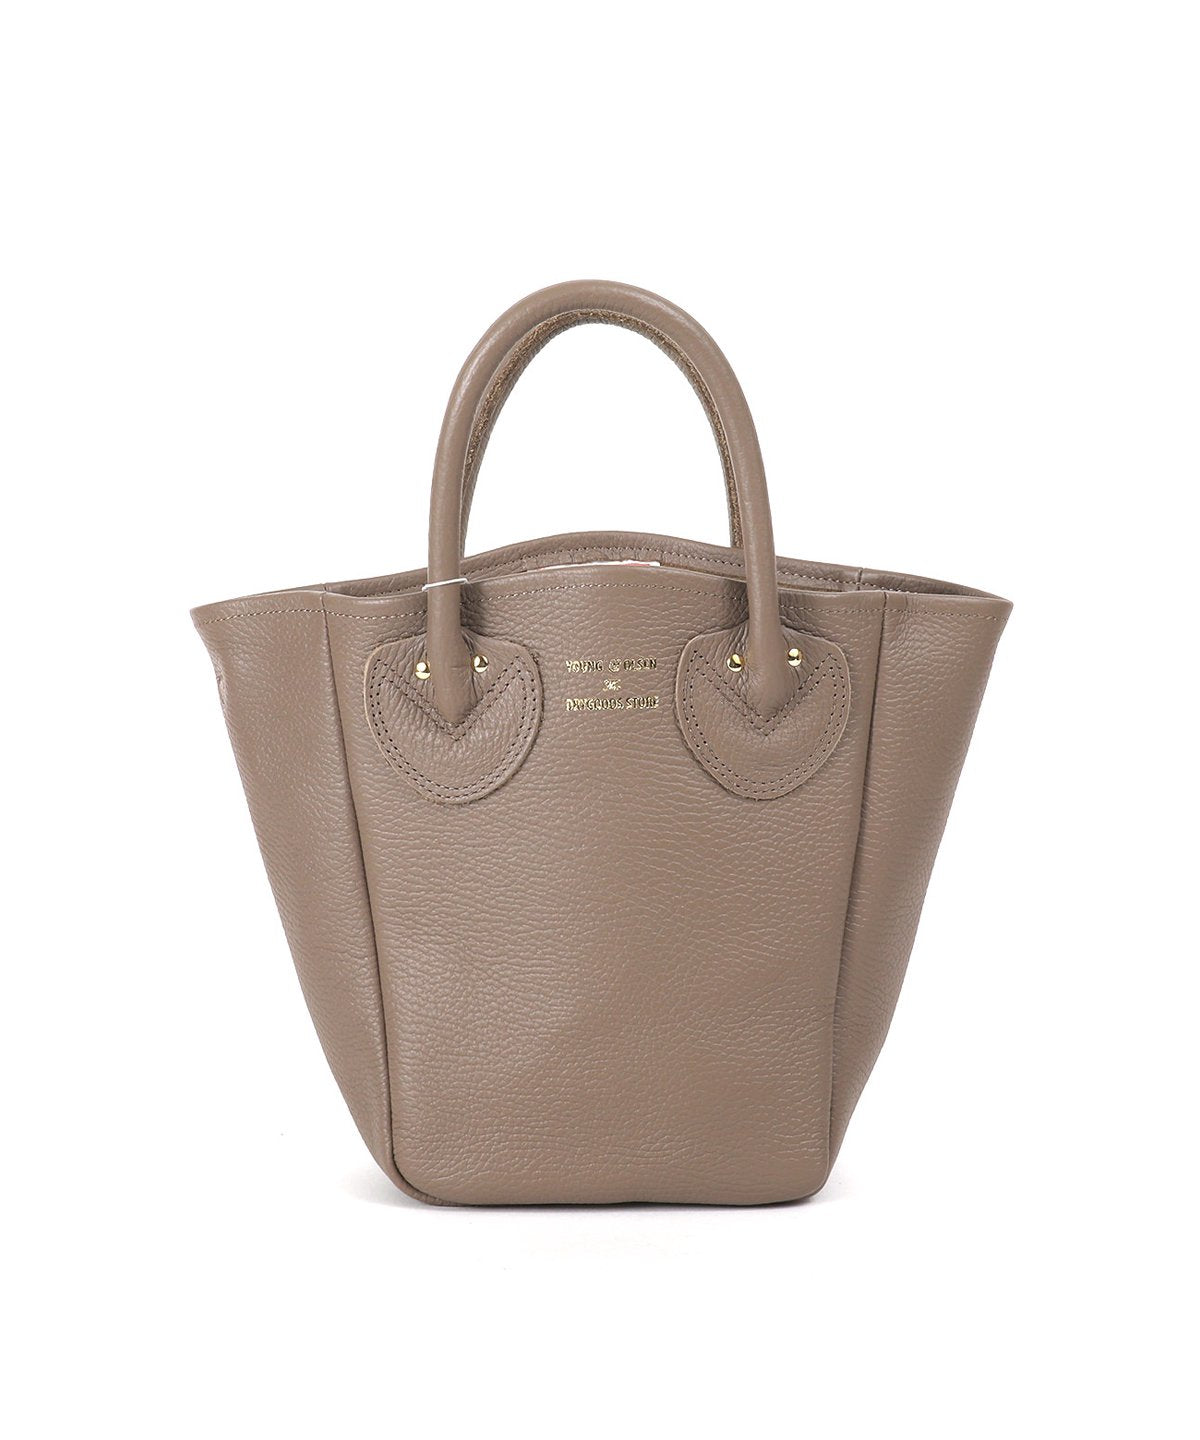 YOUNG&OLSEN  PETITE LEATHER TOTE